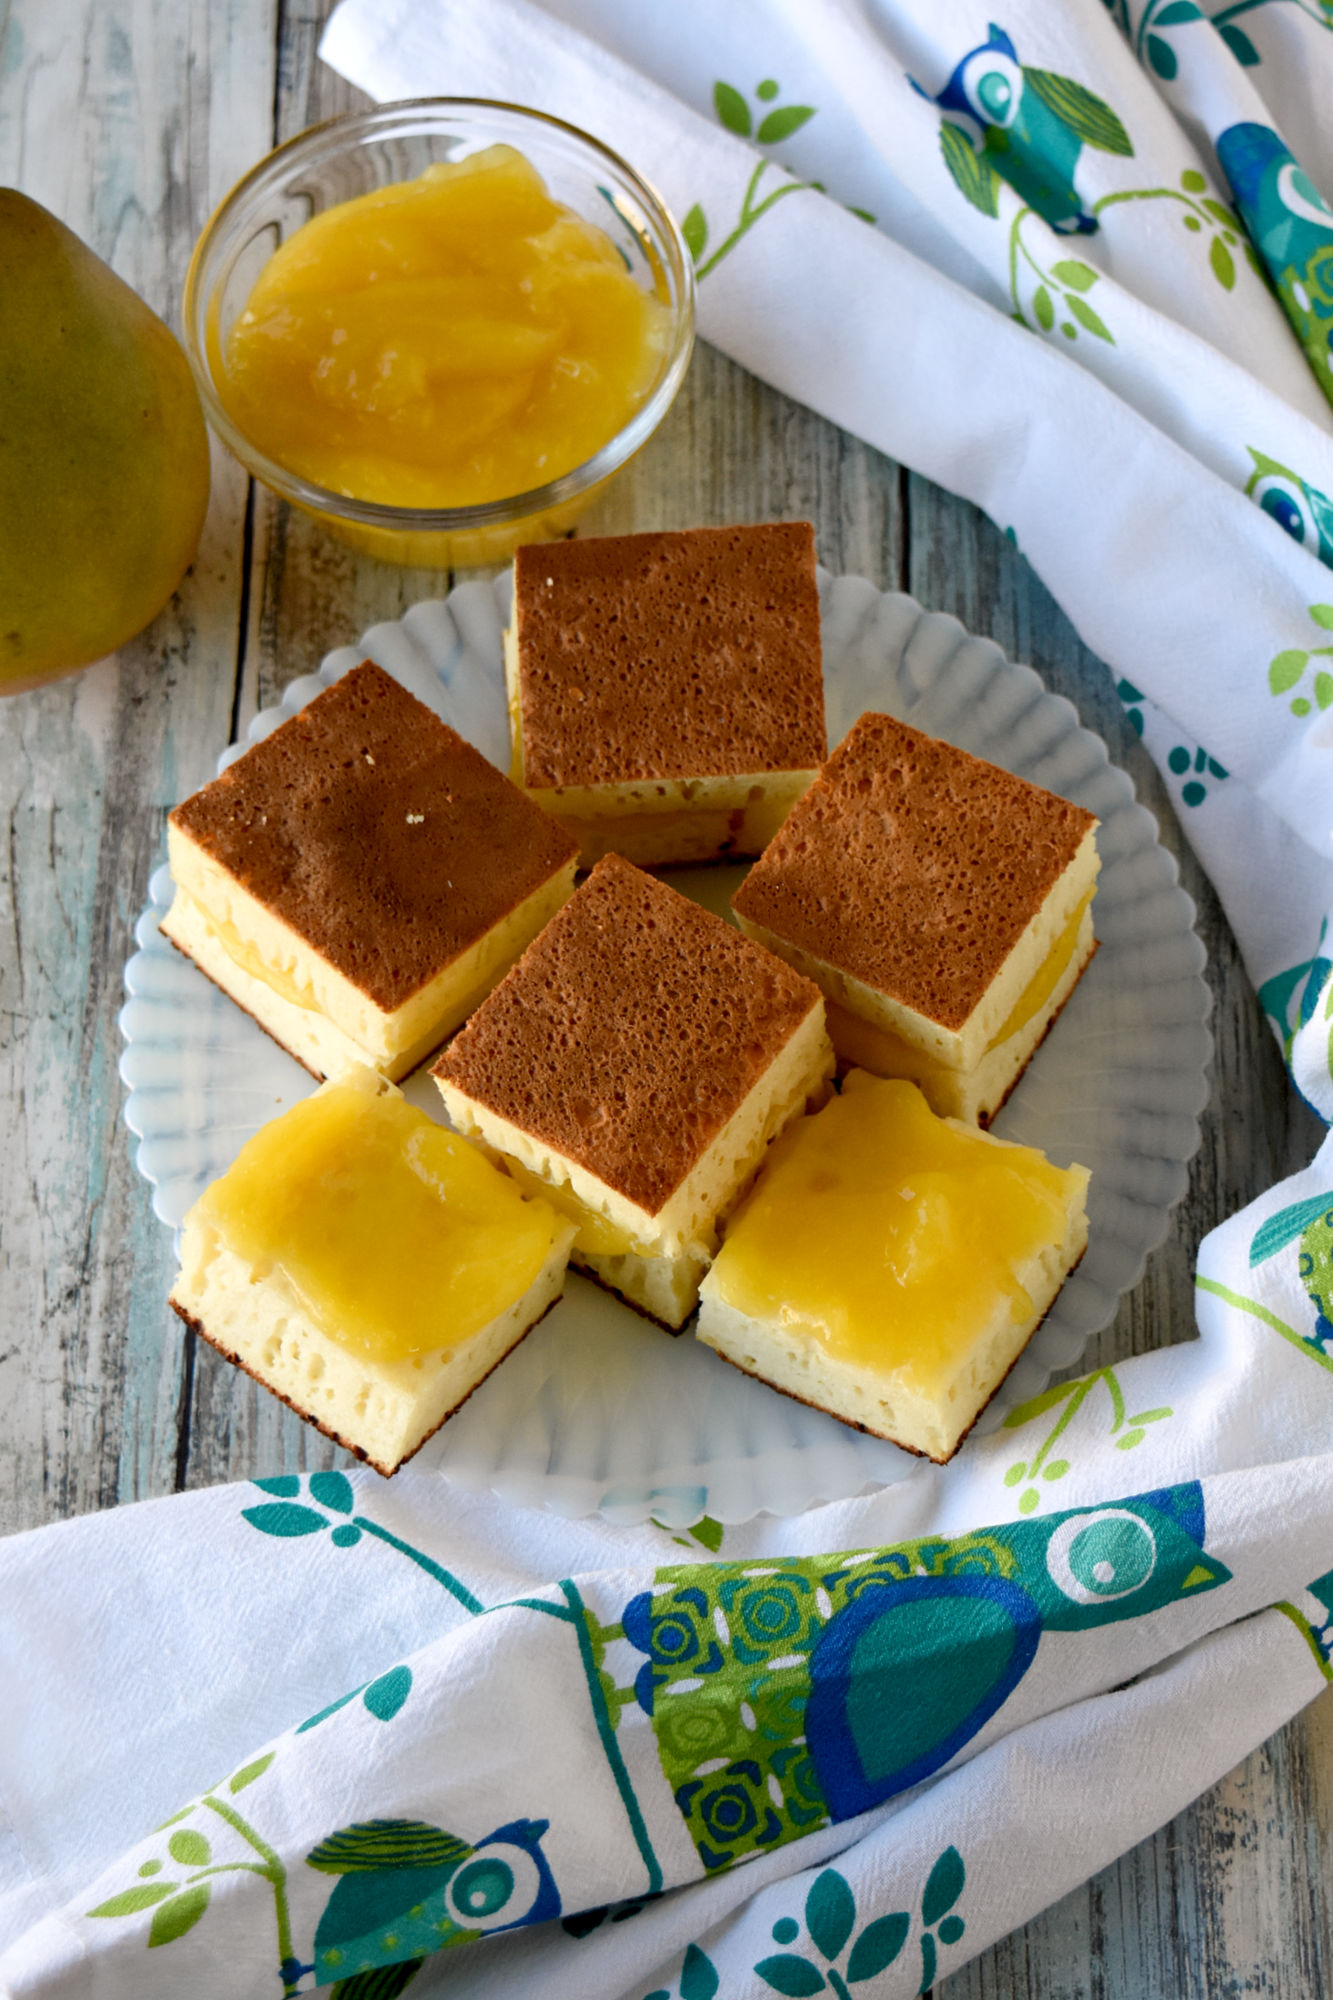 Mango Filled Martabak Manis is a popular street food from Indonesia.  Typically filled with chocolate or peanuts, this one has a sweet and sour mango filling.  #SpringSweetsWeek